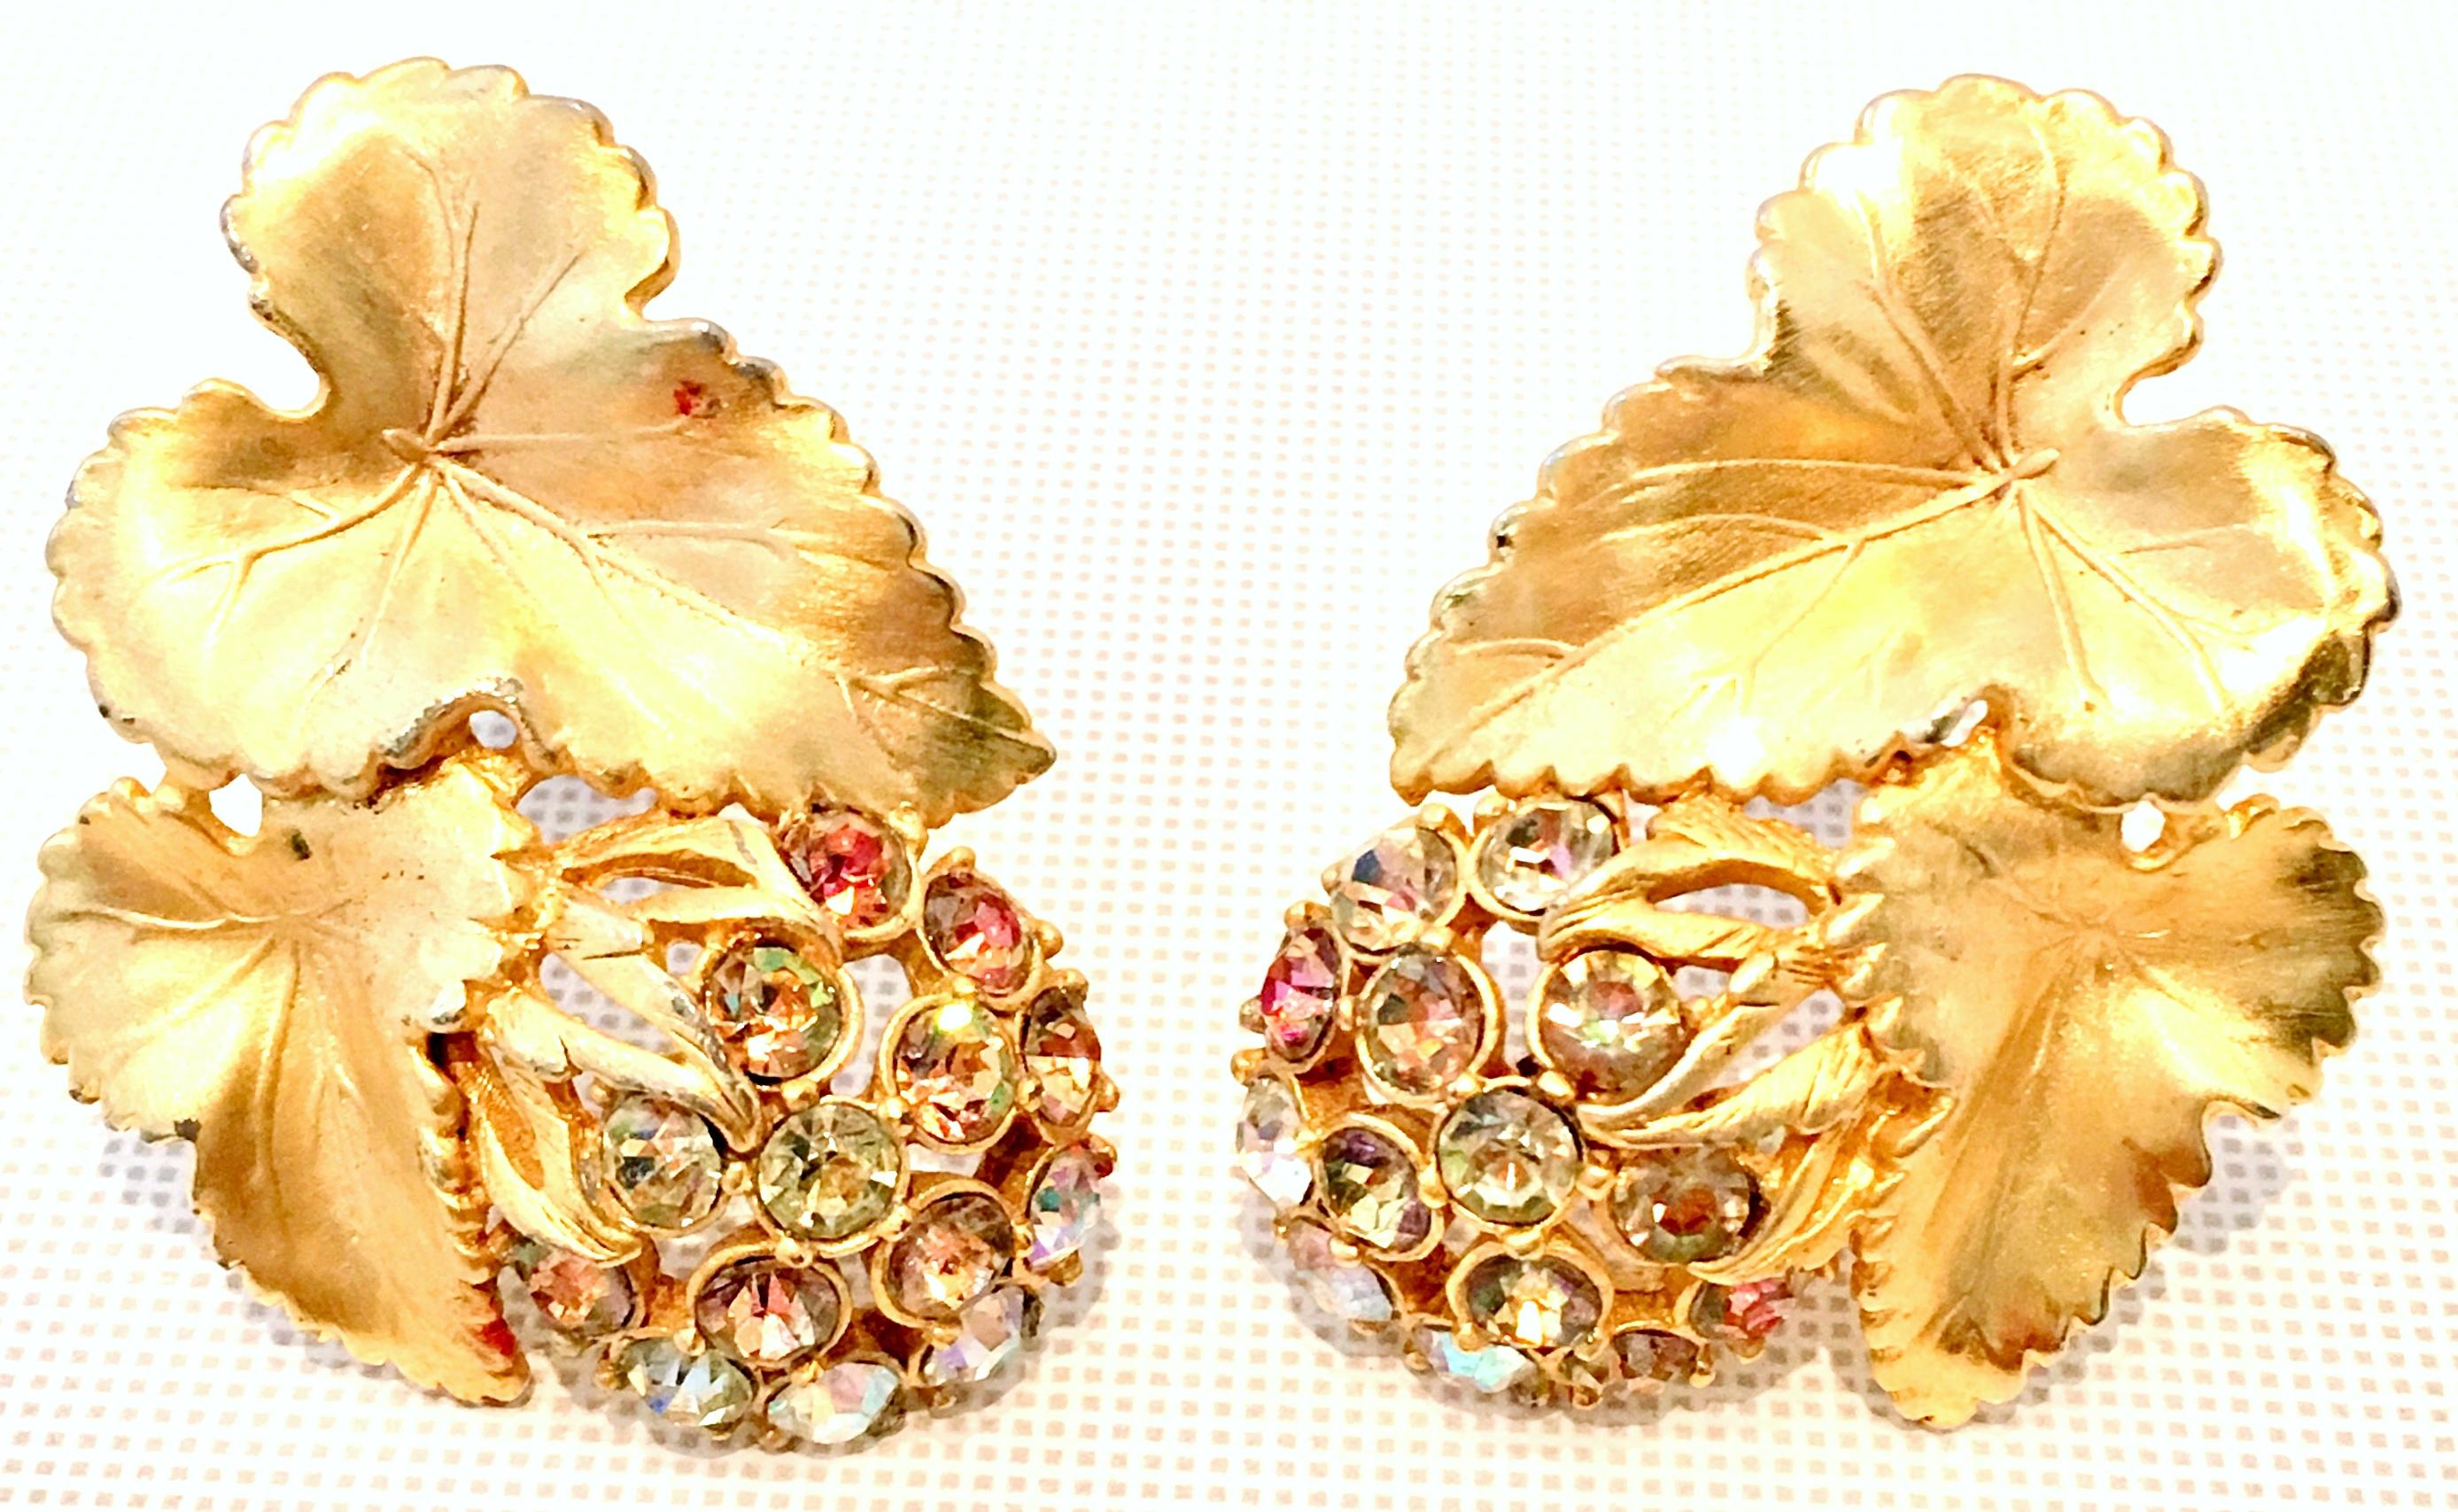 1950'S Elsa Schiaparelli Organic Modern Brushed Gold Plate Leaf & Fruit Earring Pair. This incredibly rare collectors piece, most likely part of the 